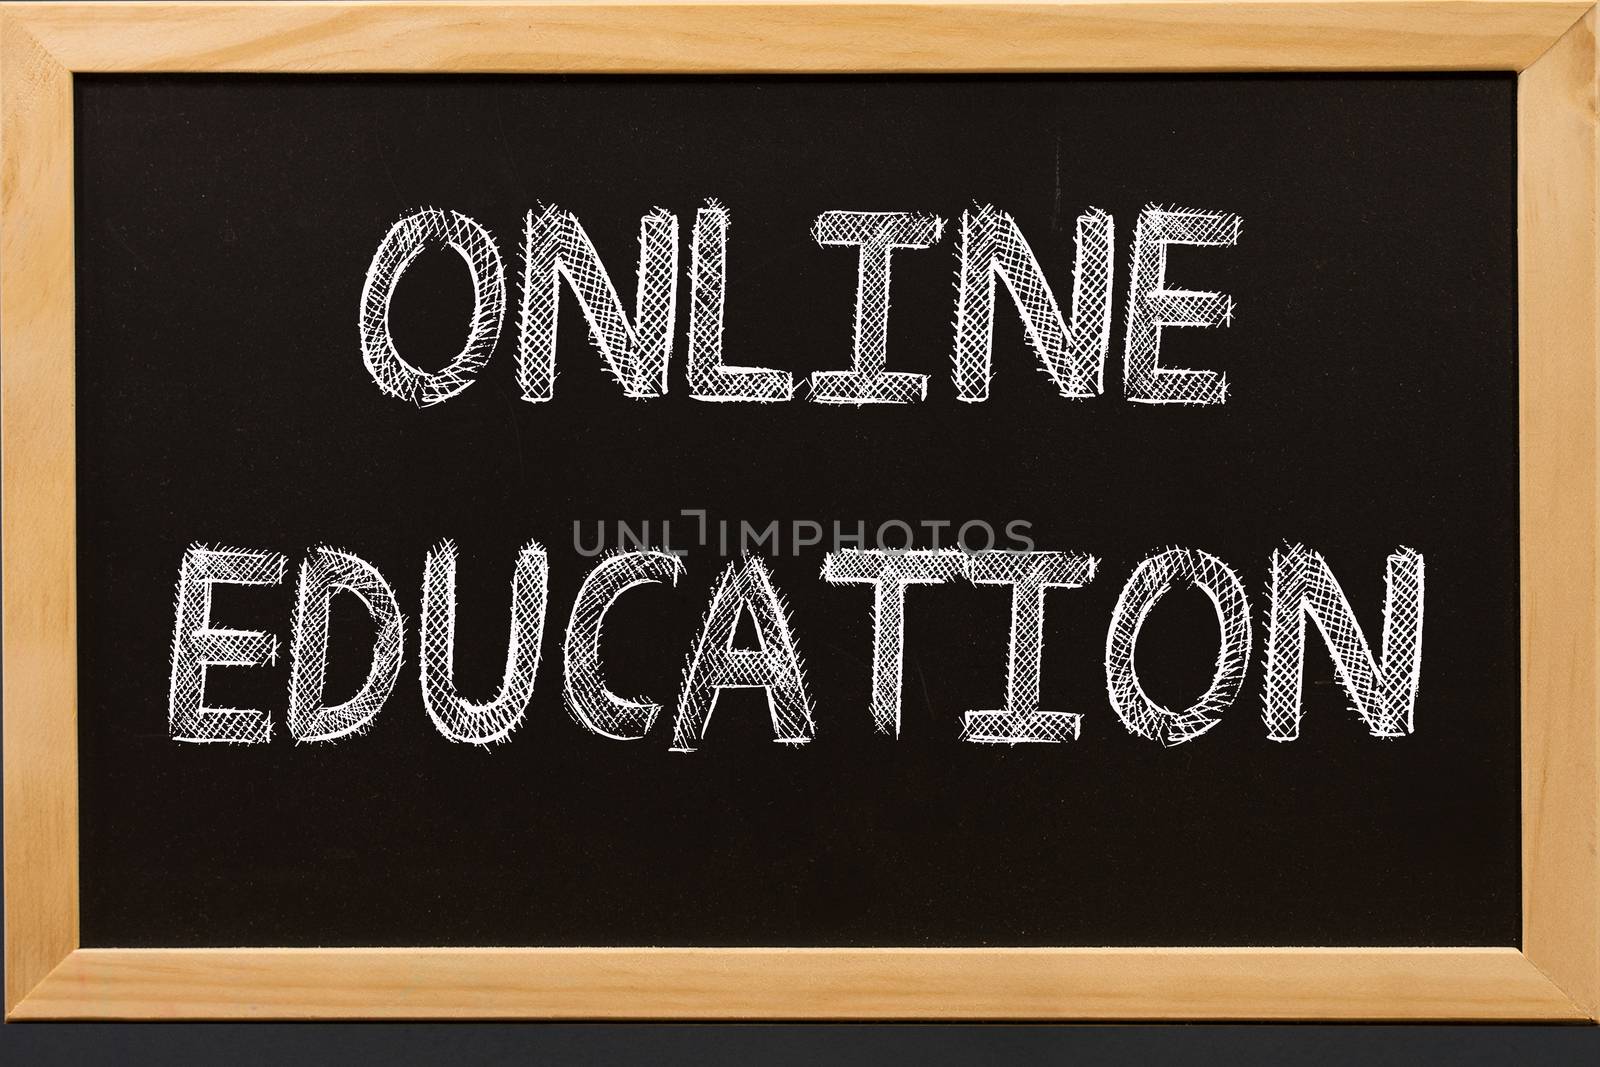 Concept Education online.  Education online text on black background